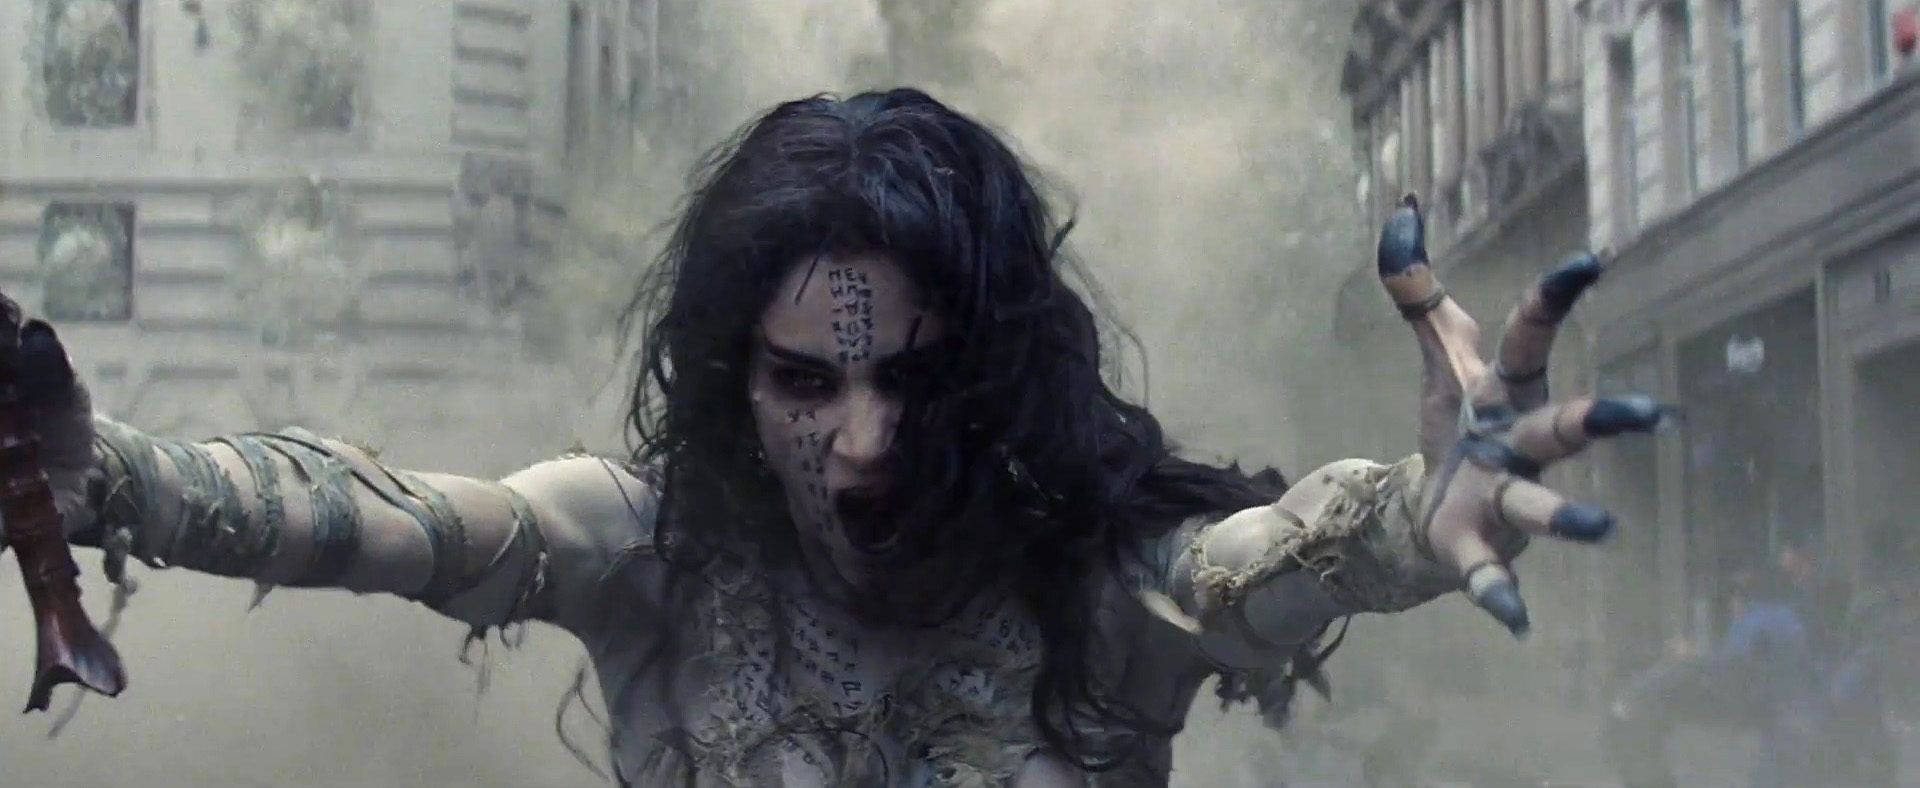 Free download The Mummy 2017 Sofia Boutella Wallpaper 10 [1920x788] for your Desktop, Mobile & Tablet. Explore The Mummy Wallpaper. The Mummy Minotaur Wallpaper, Are You My Mummy Wallpaper